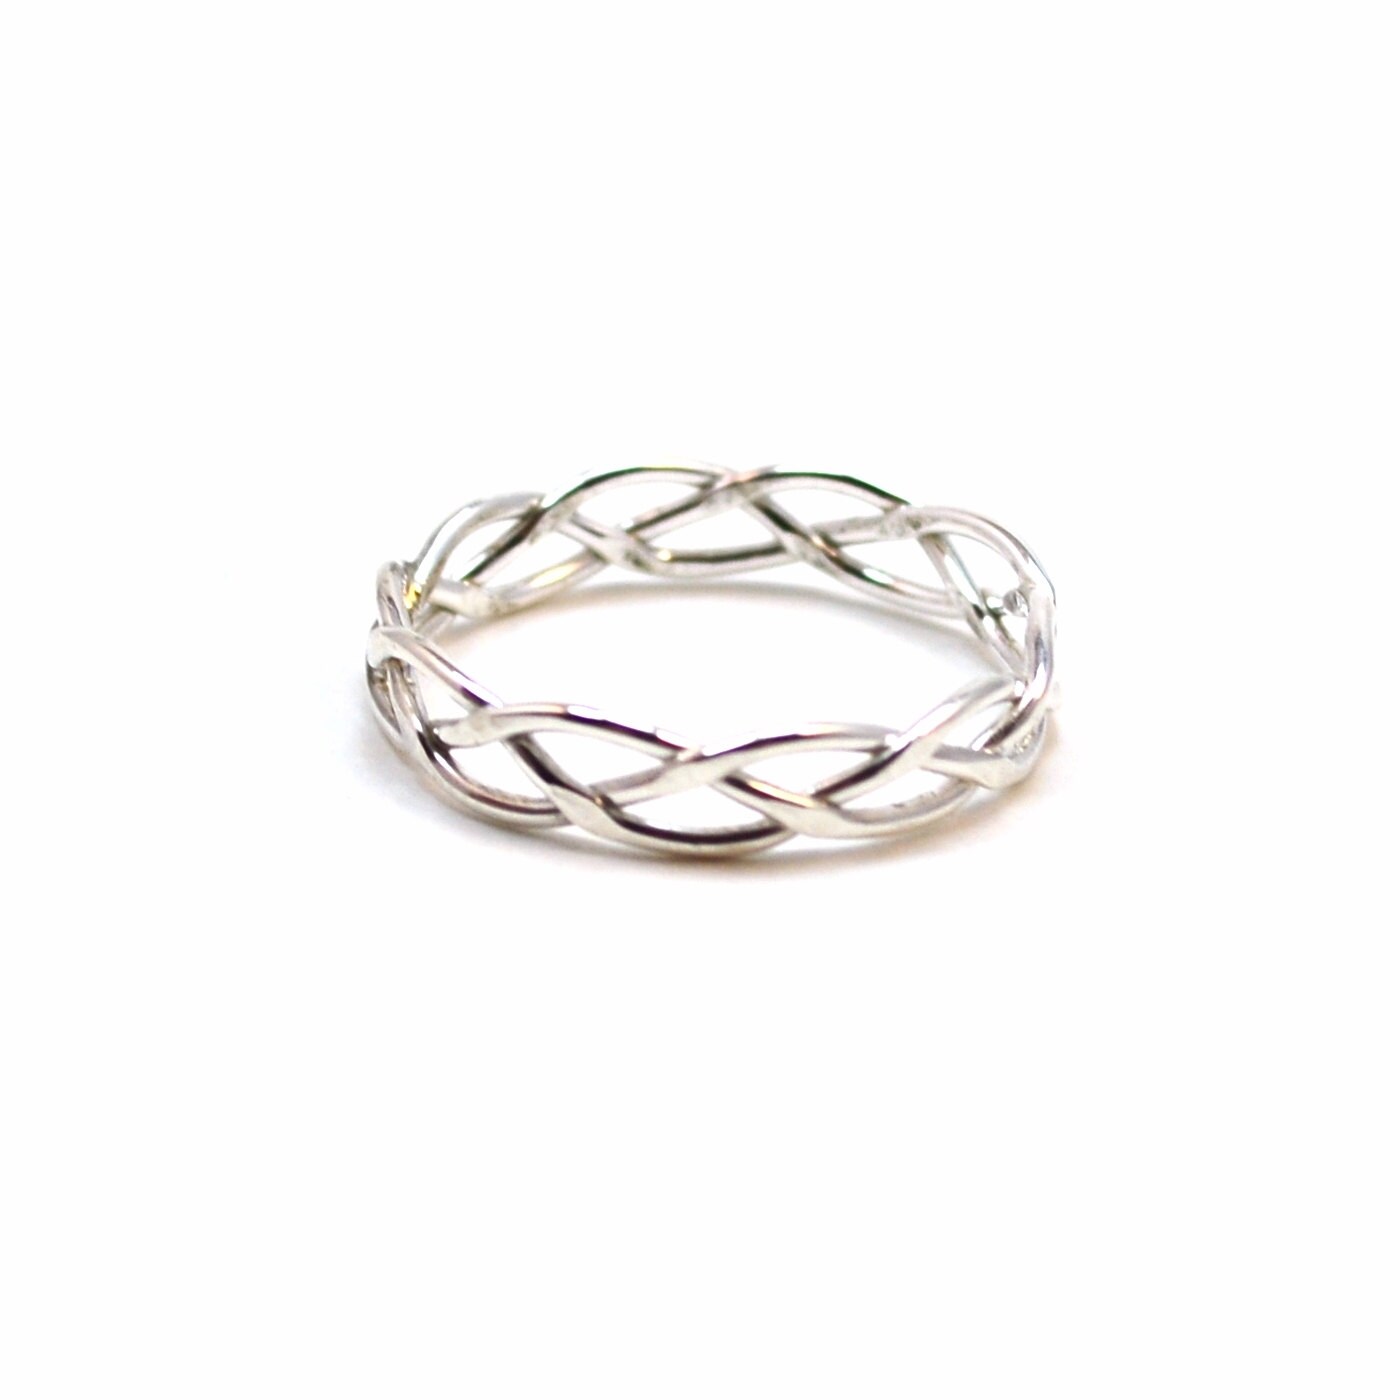 Silver Braided Ring. Hammered or Smooth. Sterling Silver Braid